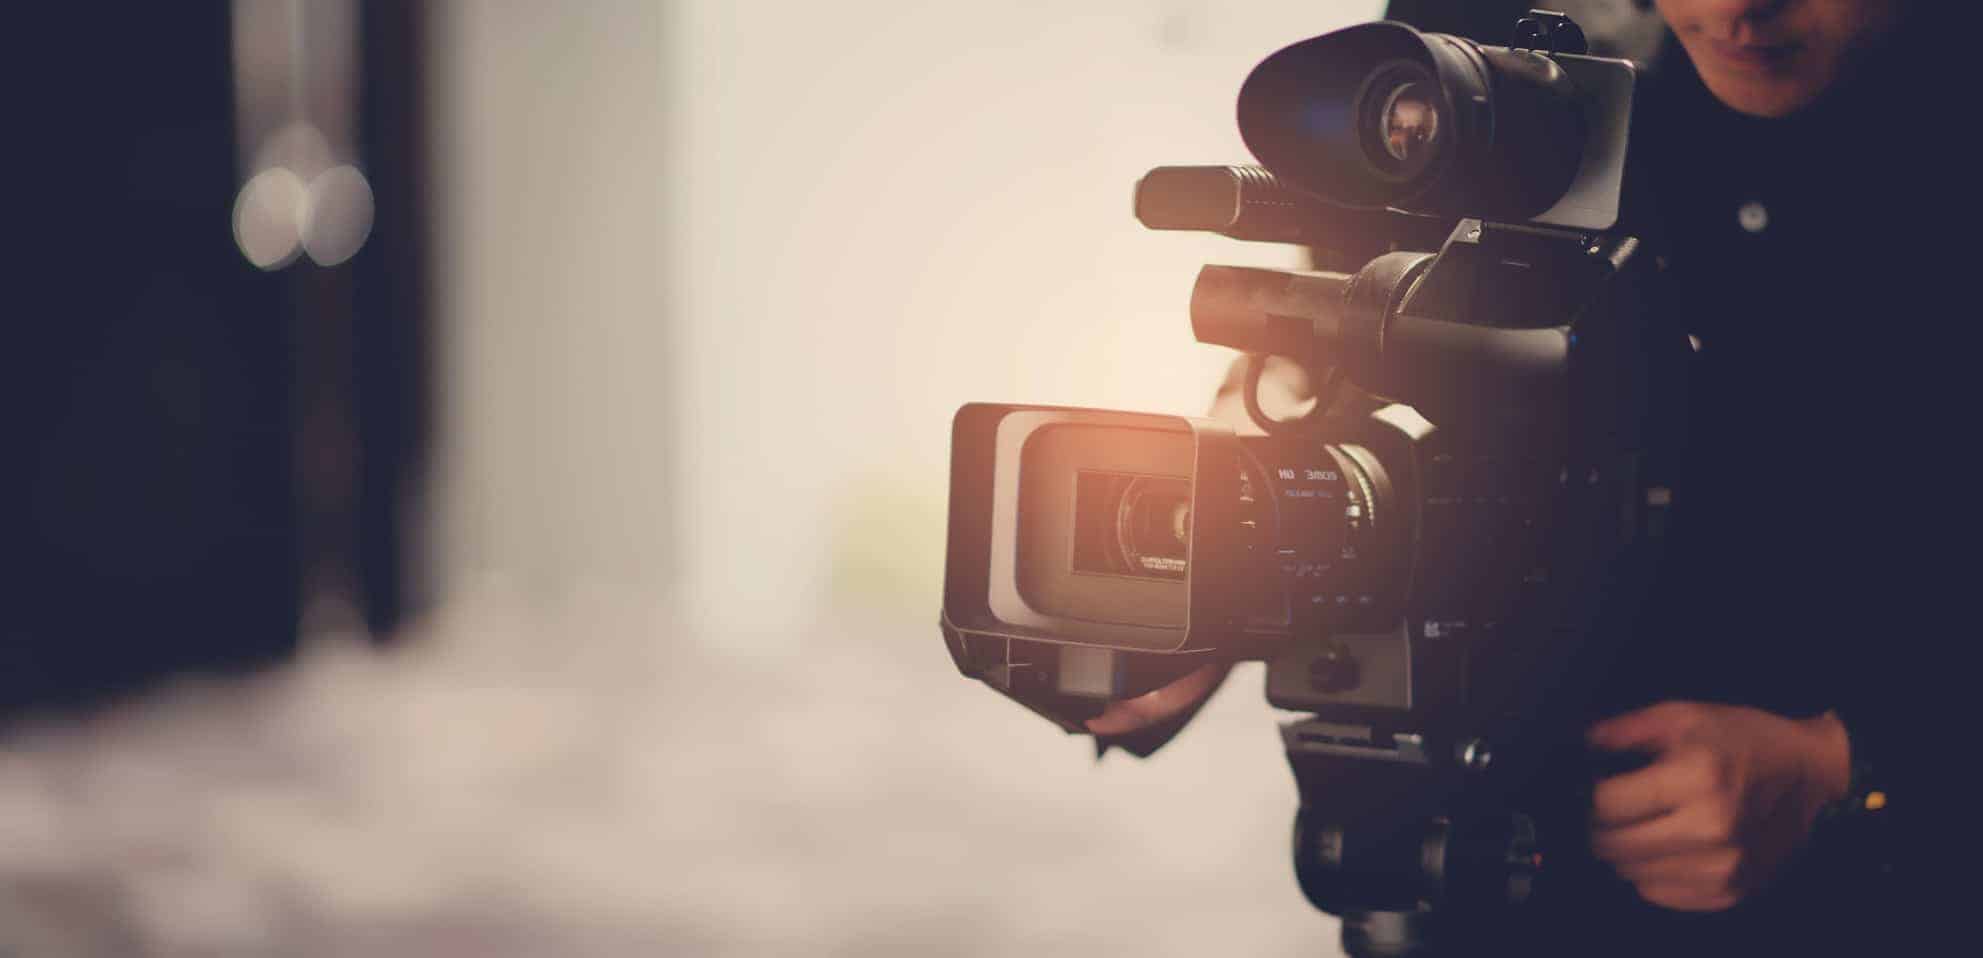 How to Hire a Videographer for Your Kickstarter Project